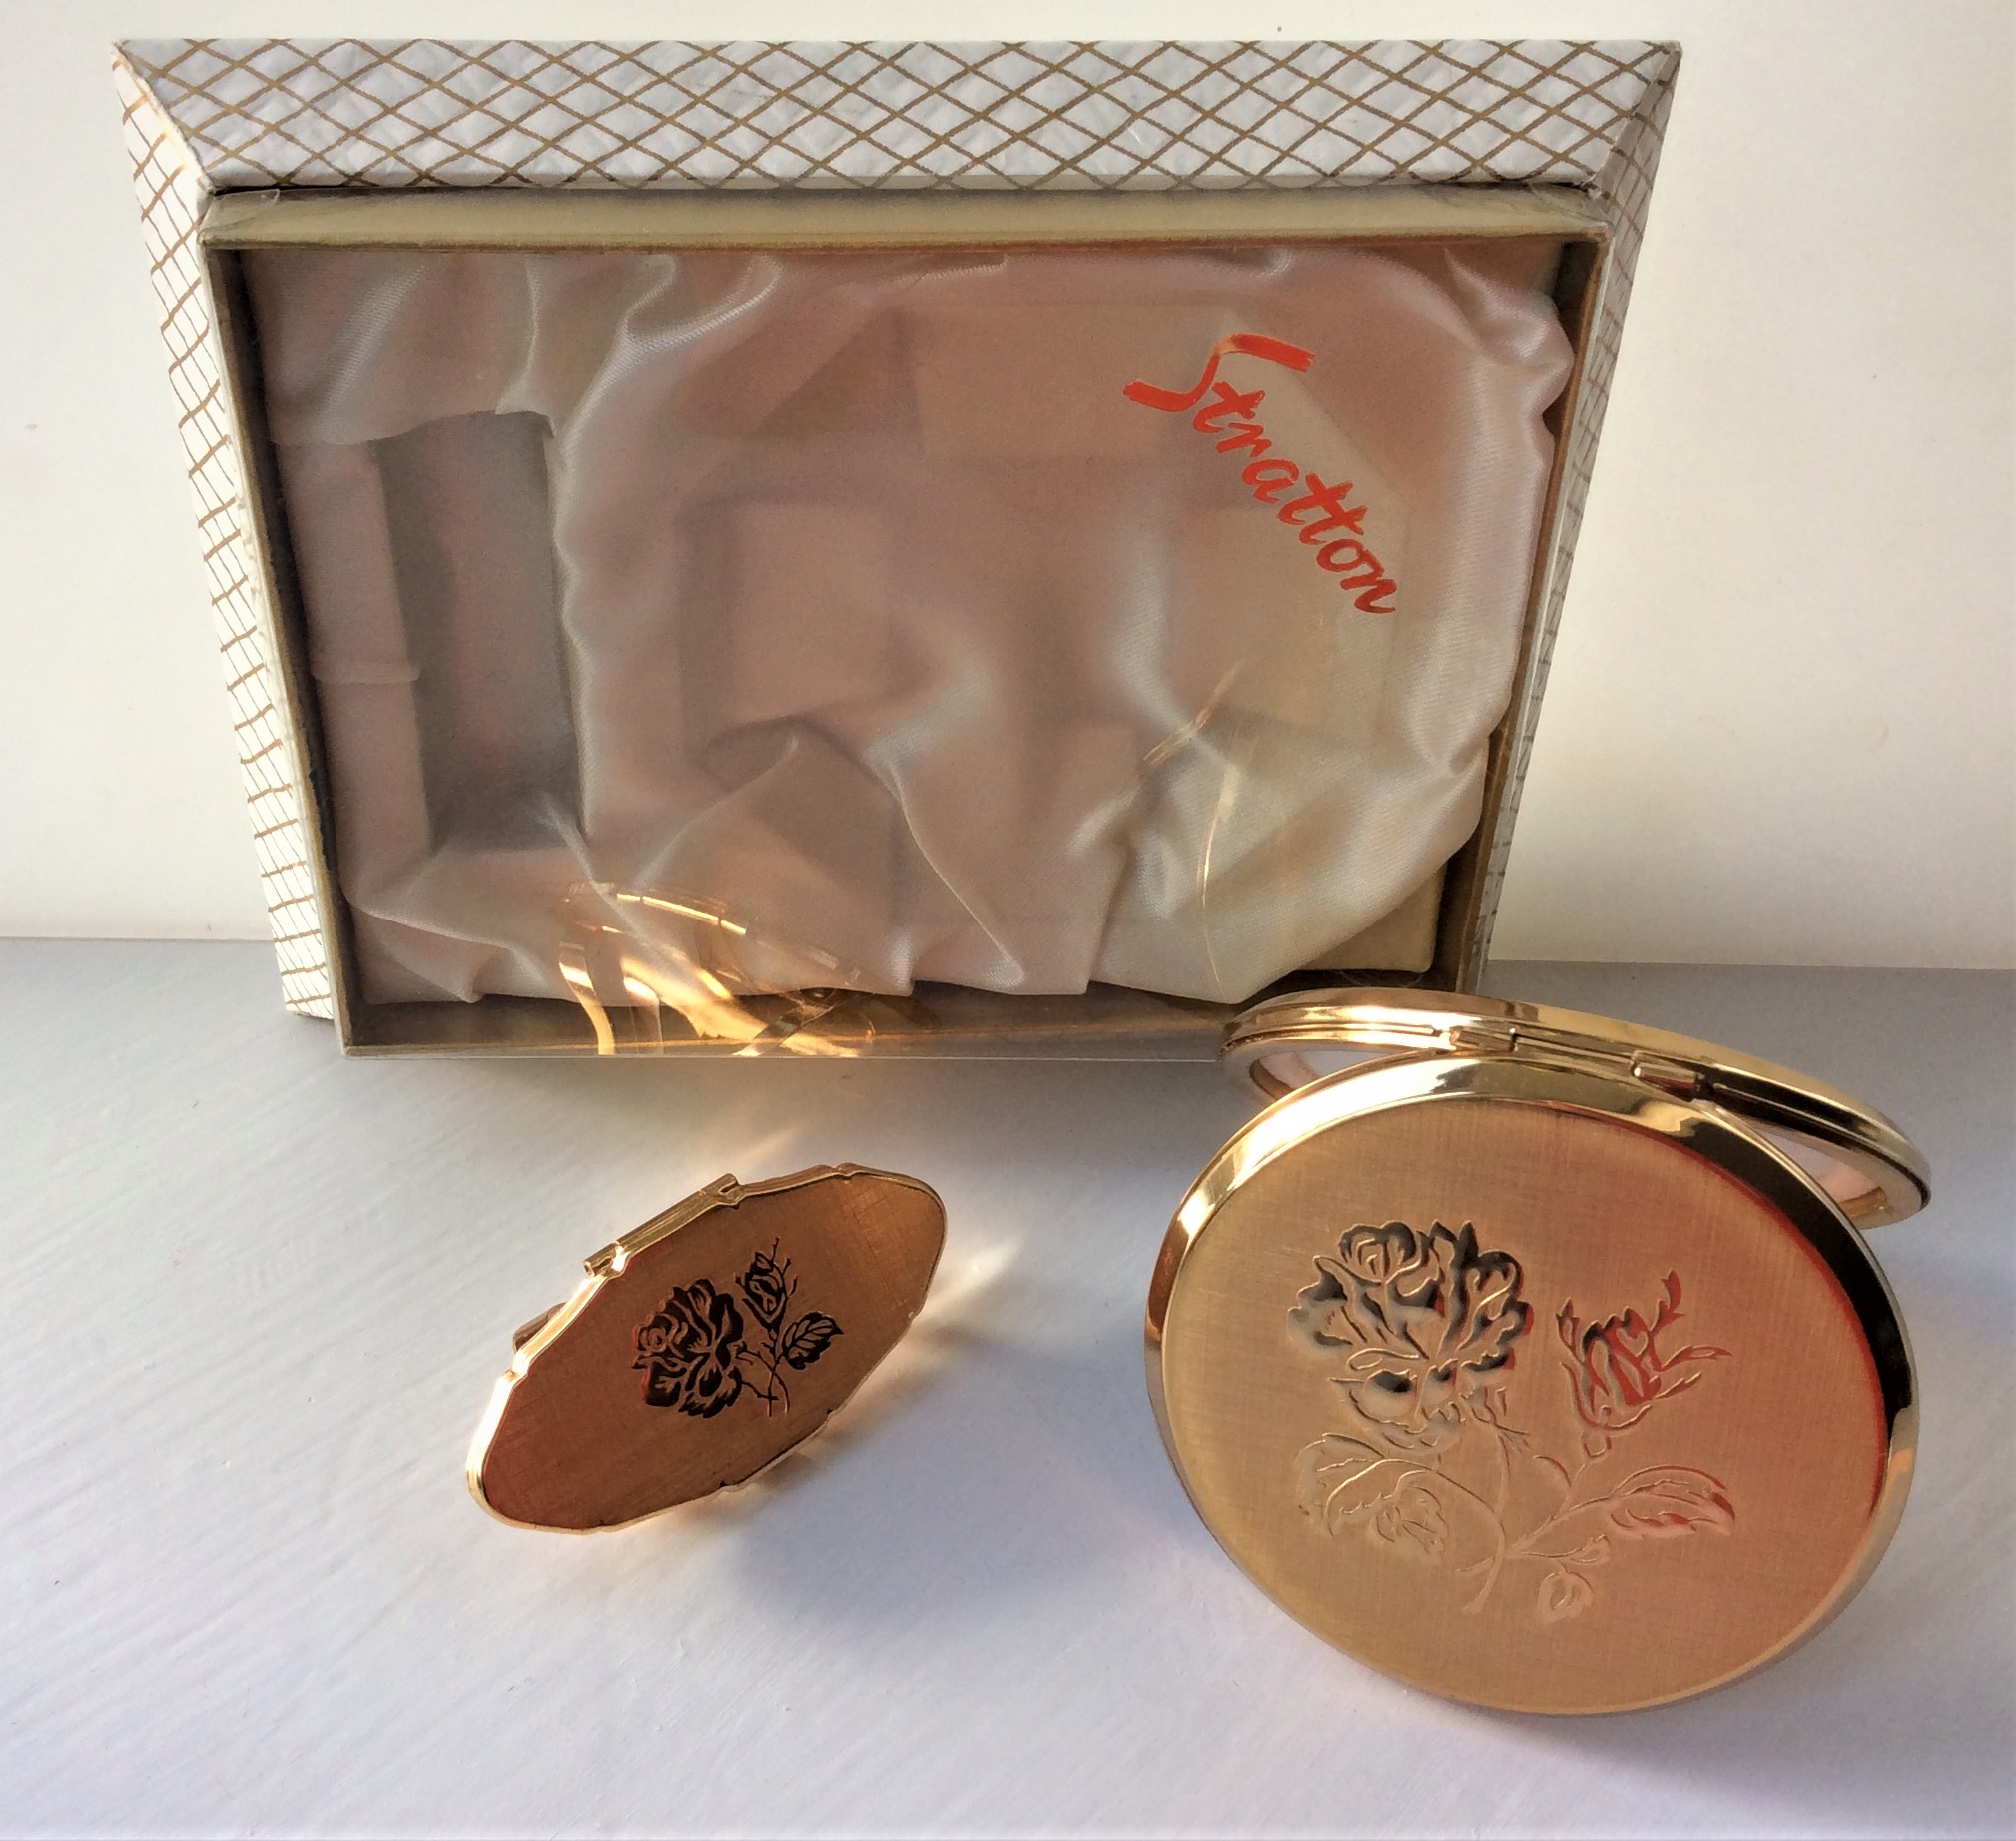 Vintage 60s/70s Unused STRATTON Convertible Rose Design Powder Compact and Lipview Lipstick Holder in original gift packaging